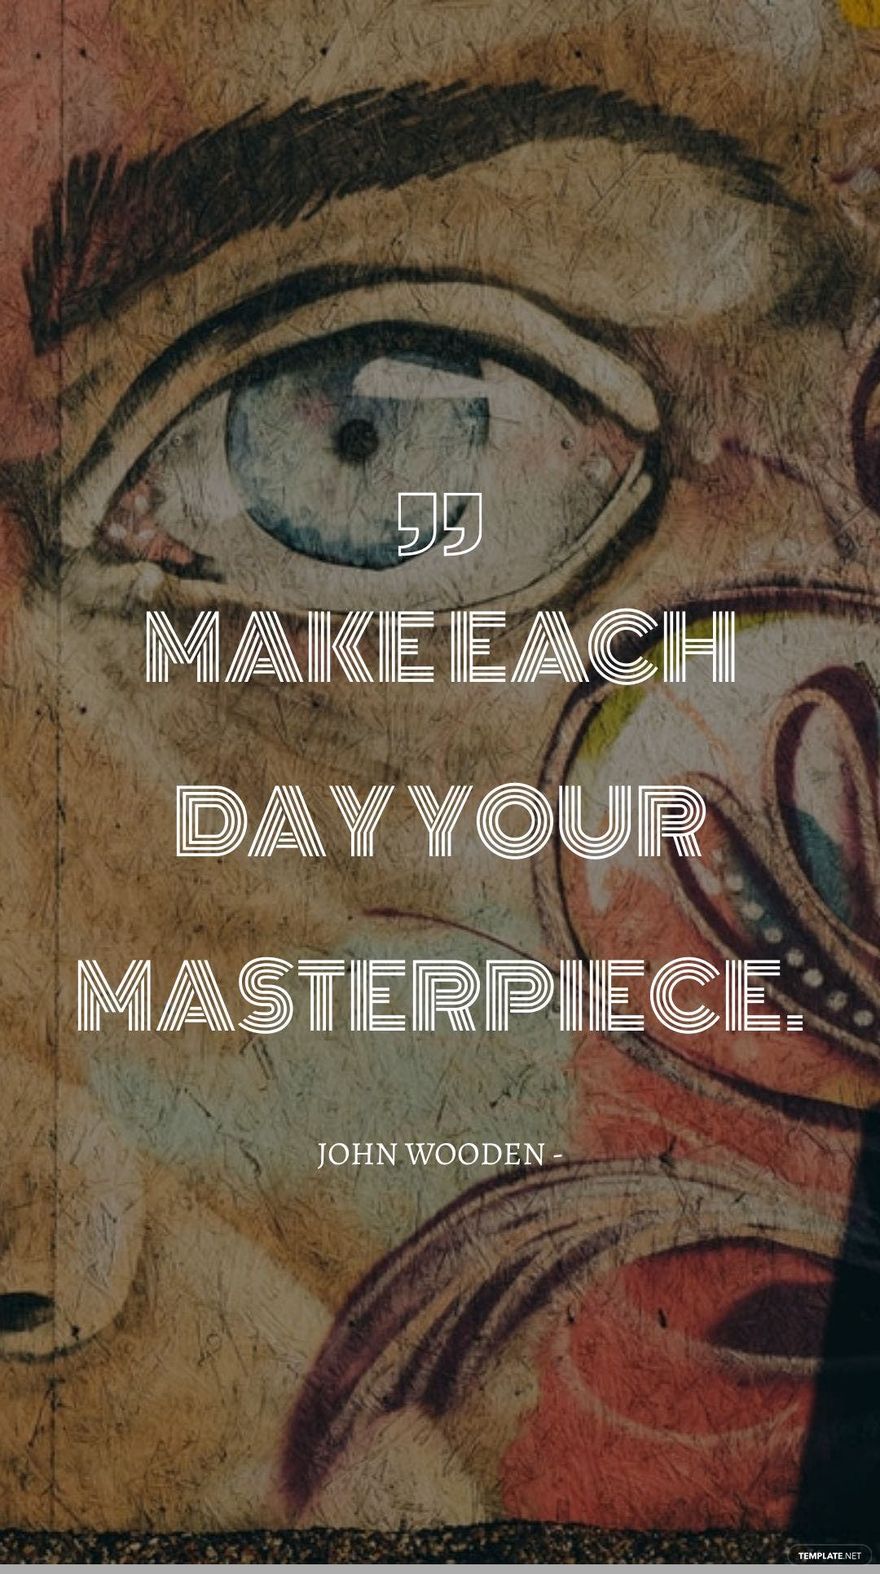 John Wooden - Make each day your masterpiece.